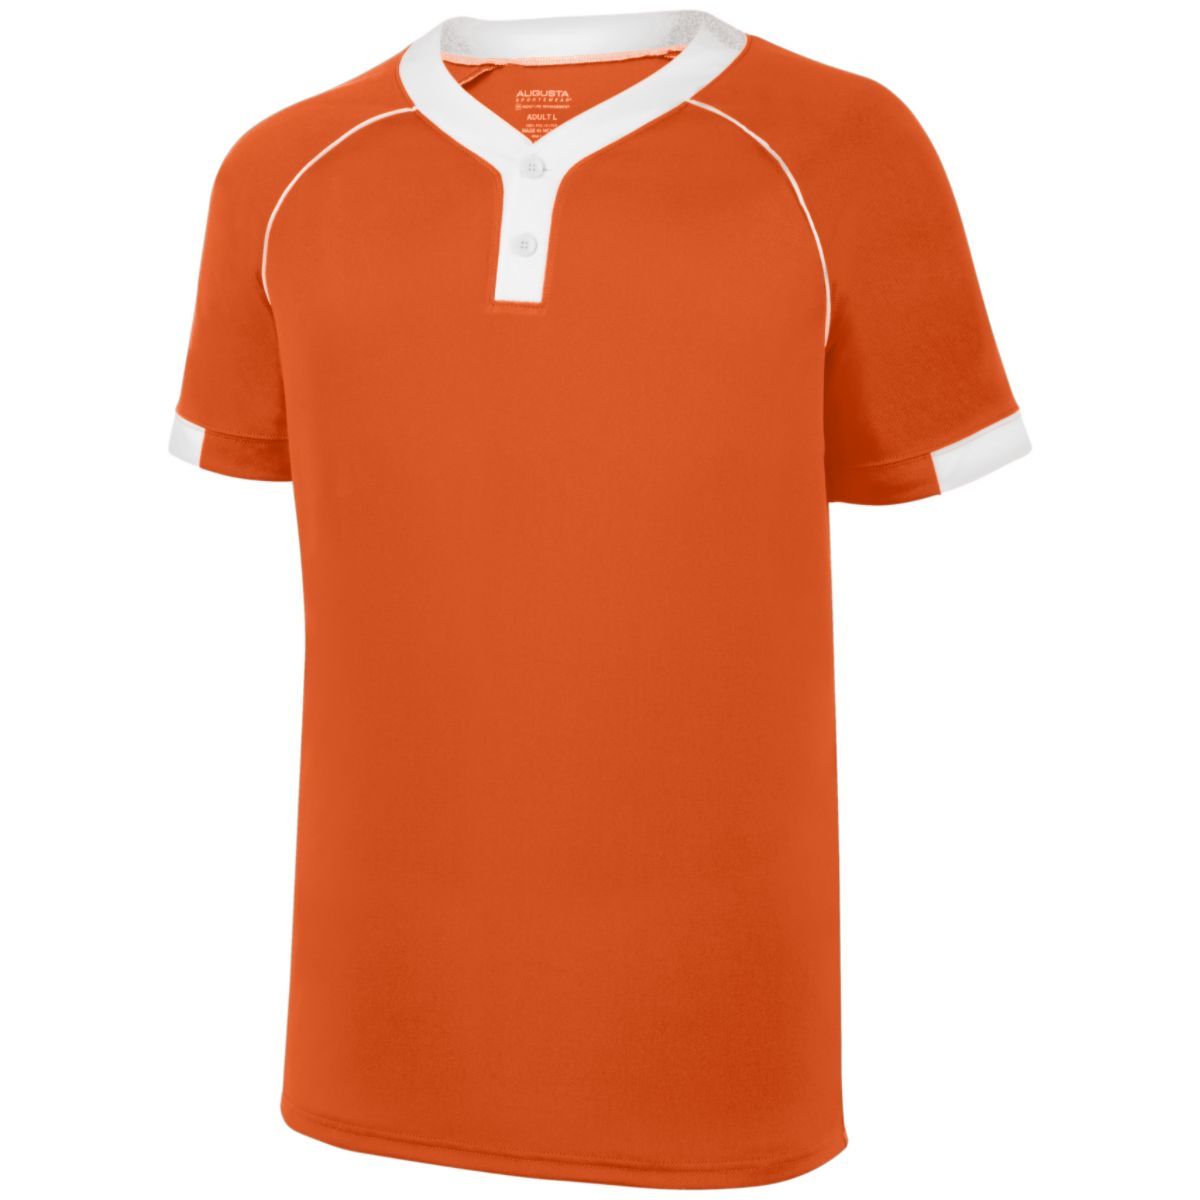 Augusta Sportswear Youth Stanza Jersey in Orange/White  -Part of the Youth, Youth-Jersey, Augusta-Products, Baseball, Shirts, All-Sports, All-Sports-1 product lines at KanaleyCreations.com